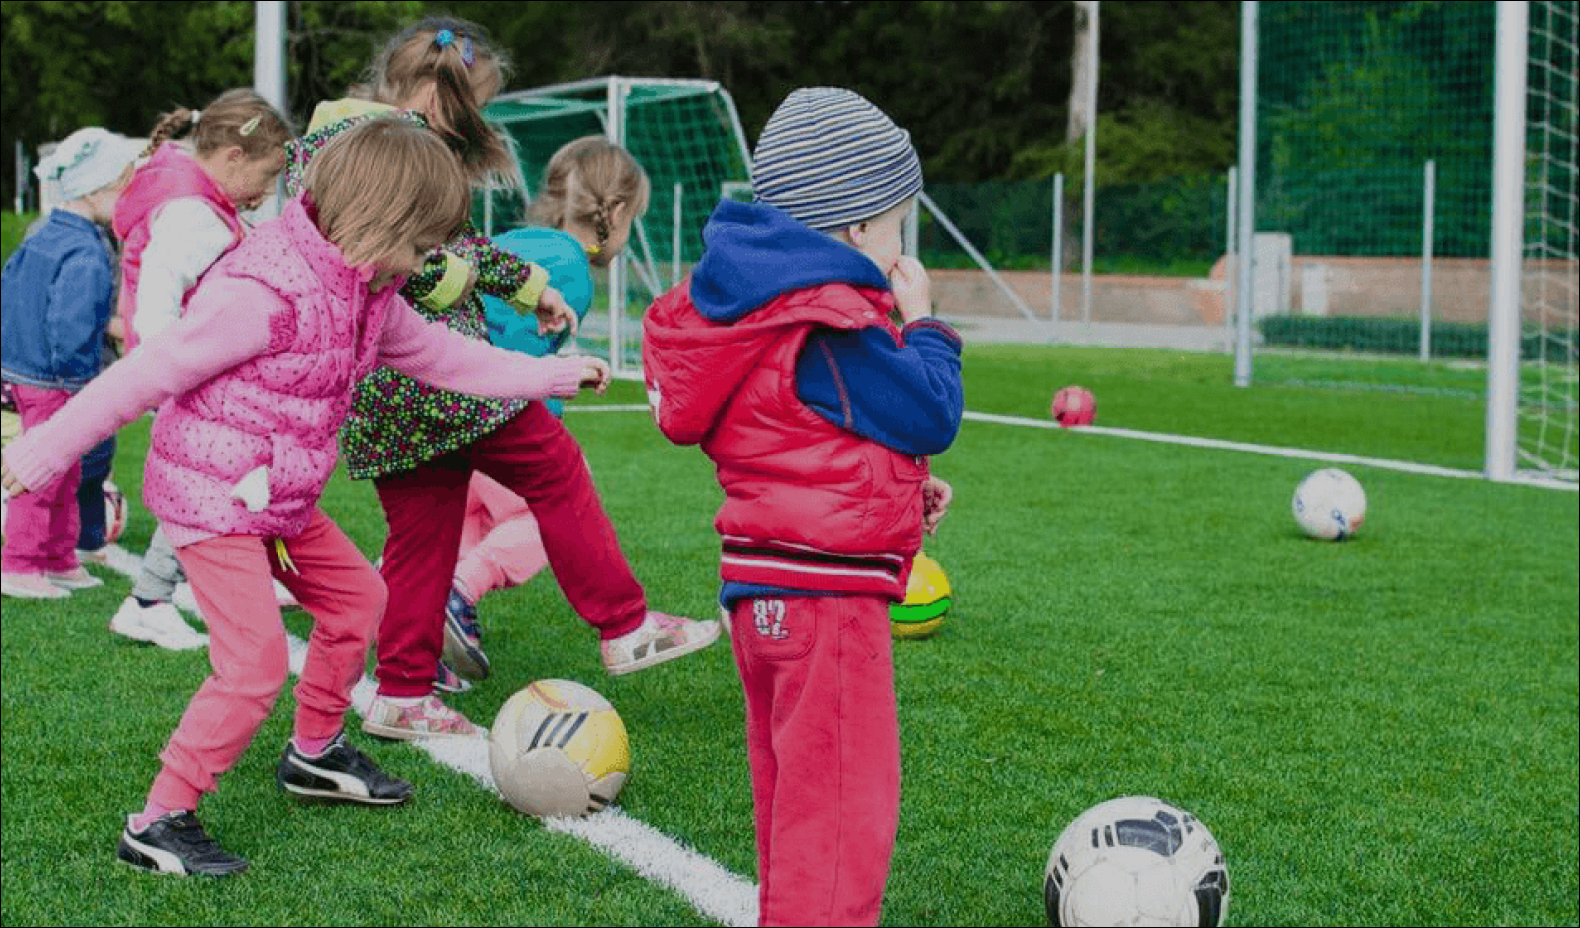 Children playing sport - SME Capital